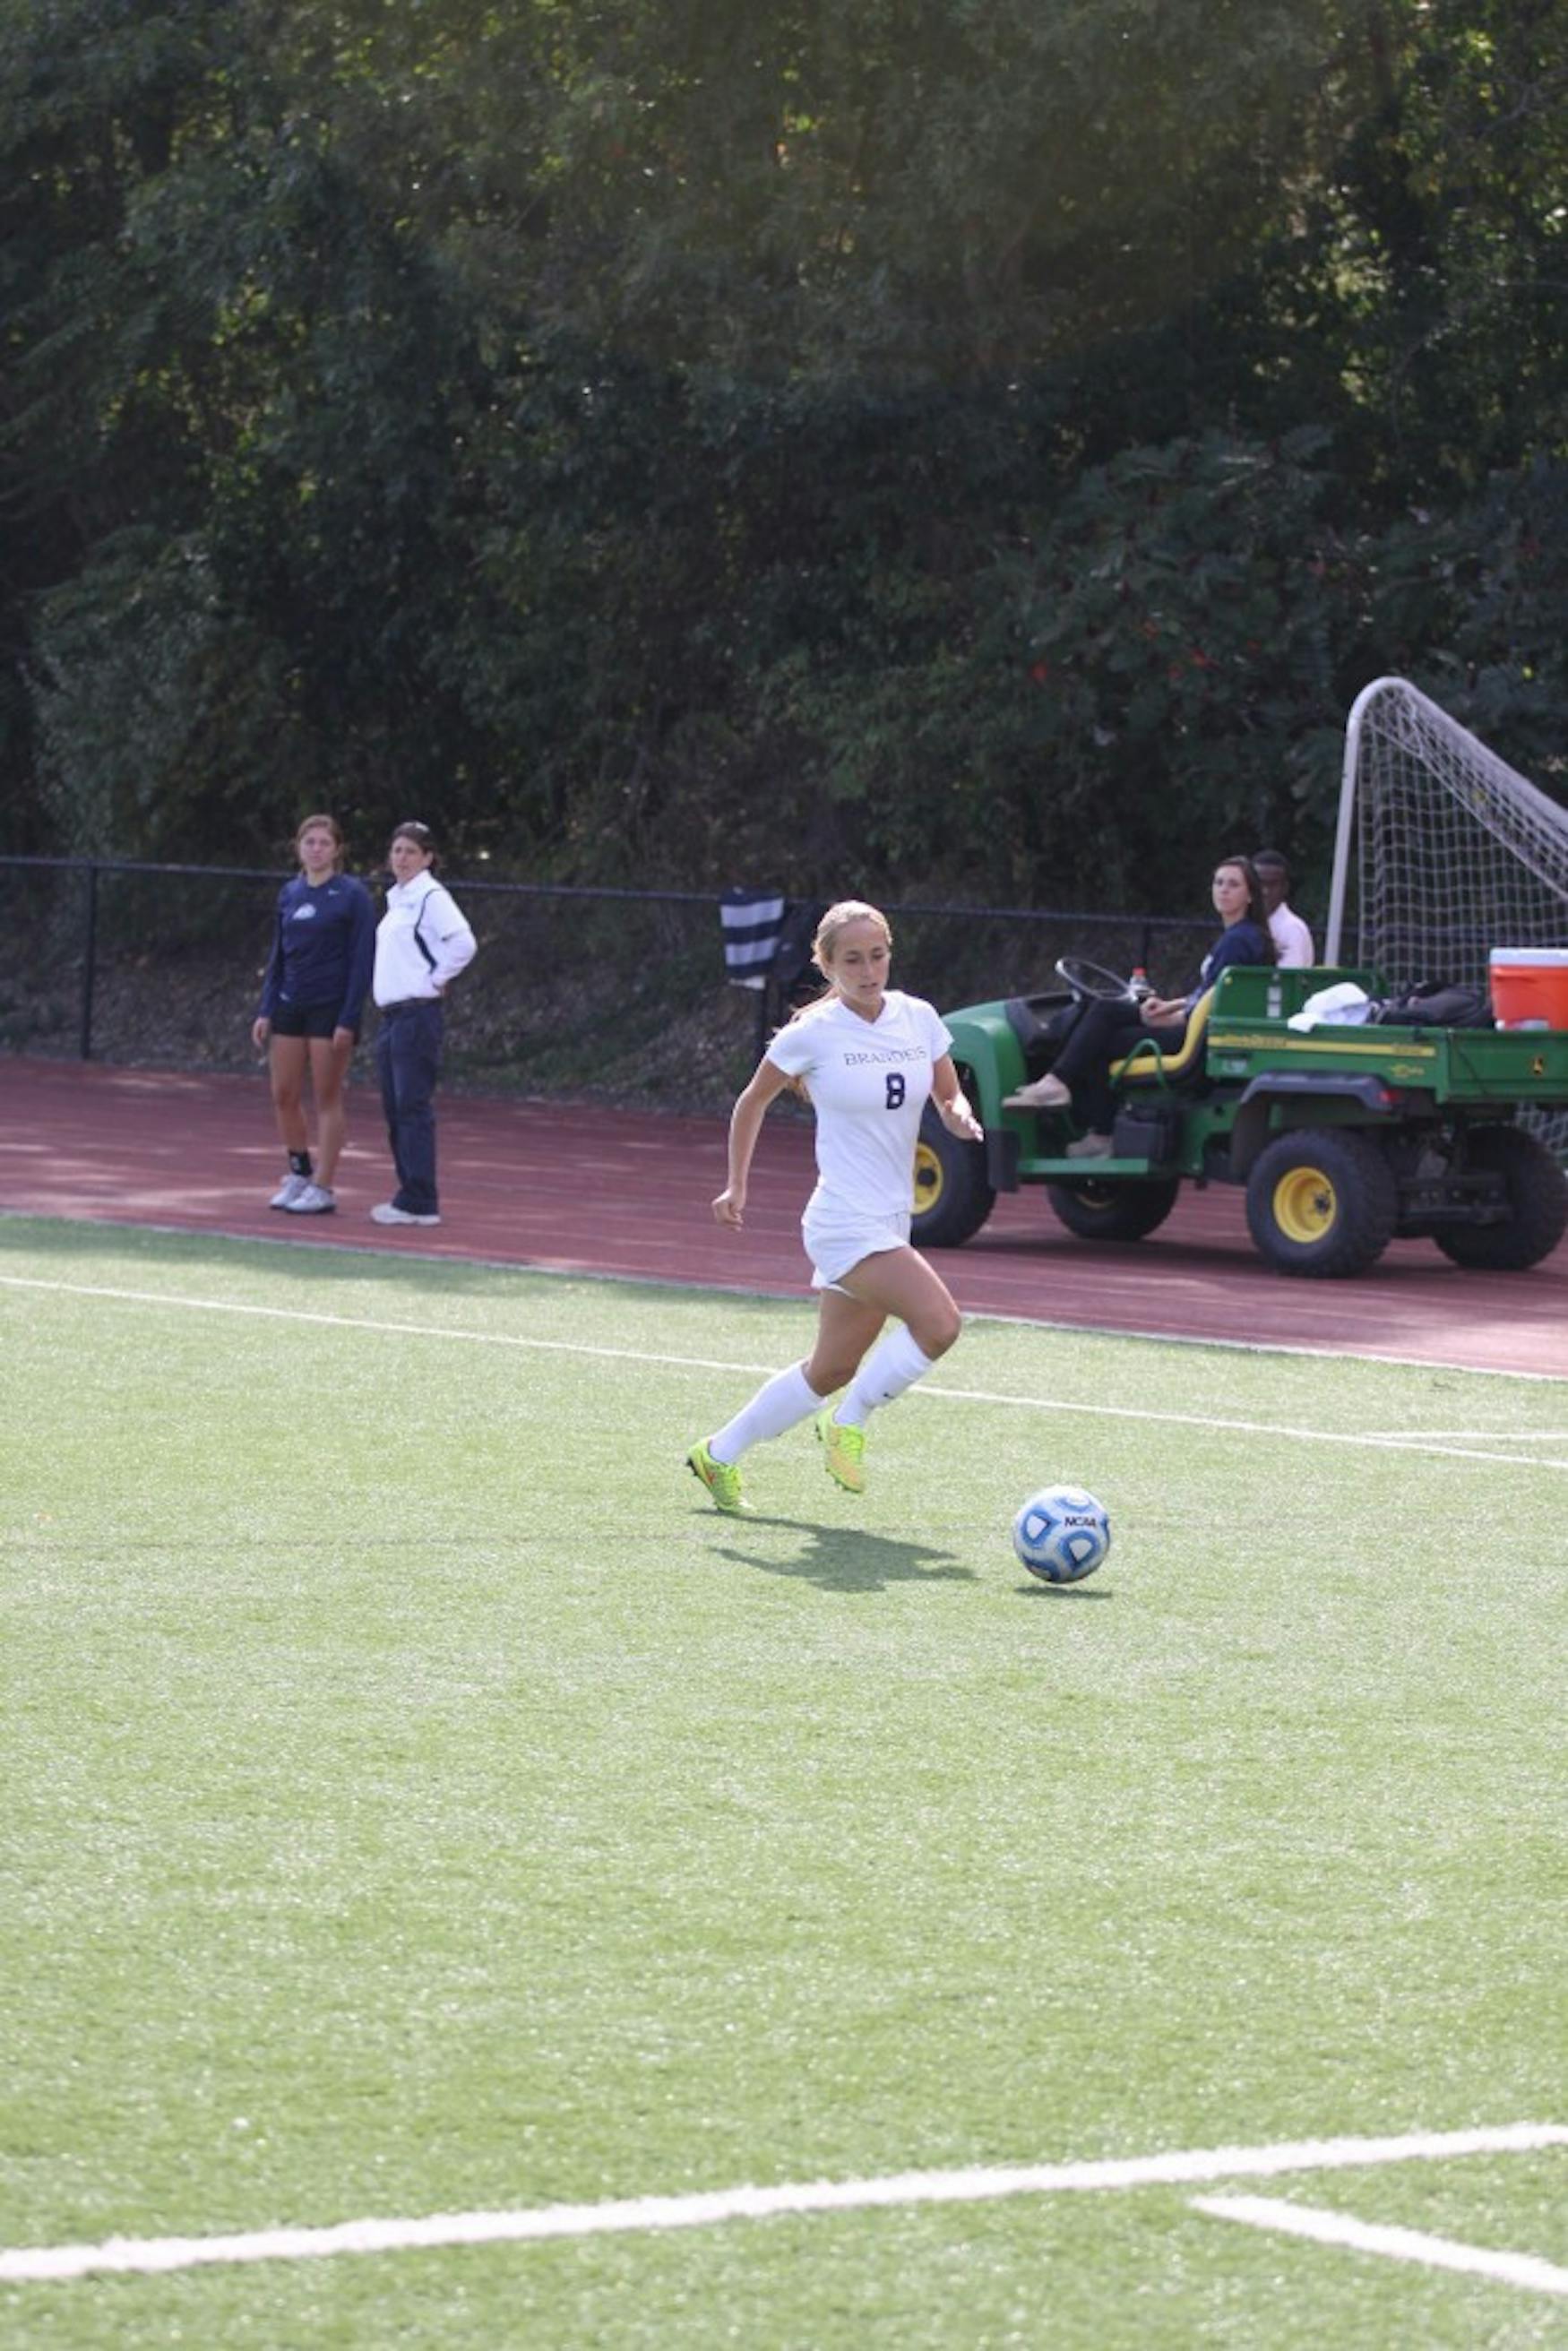 HIGH STEPPING: Forward Haliana Burhans ’18 races down the wing during the Judges’ 1-0 win over Lesley College on Saturday.